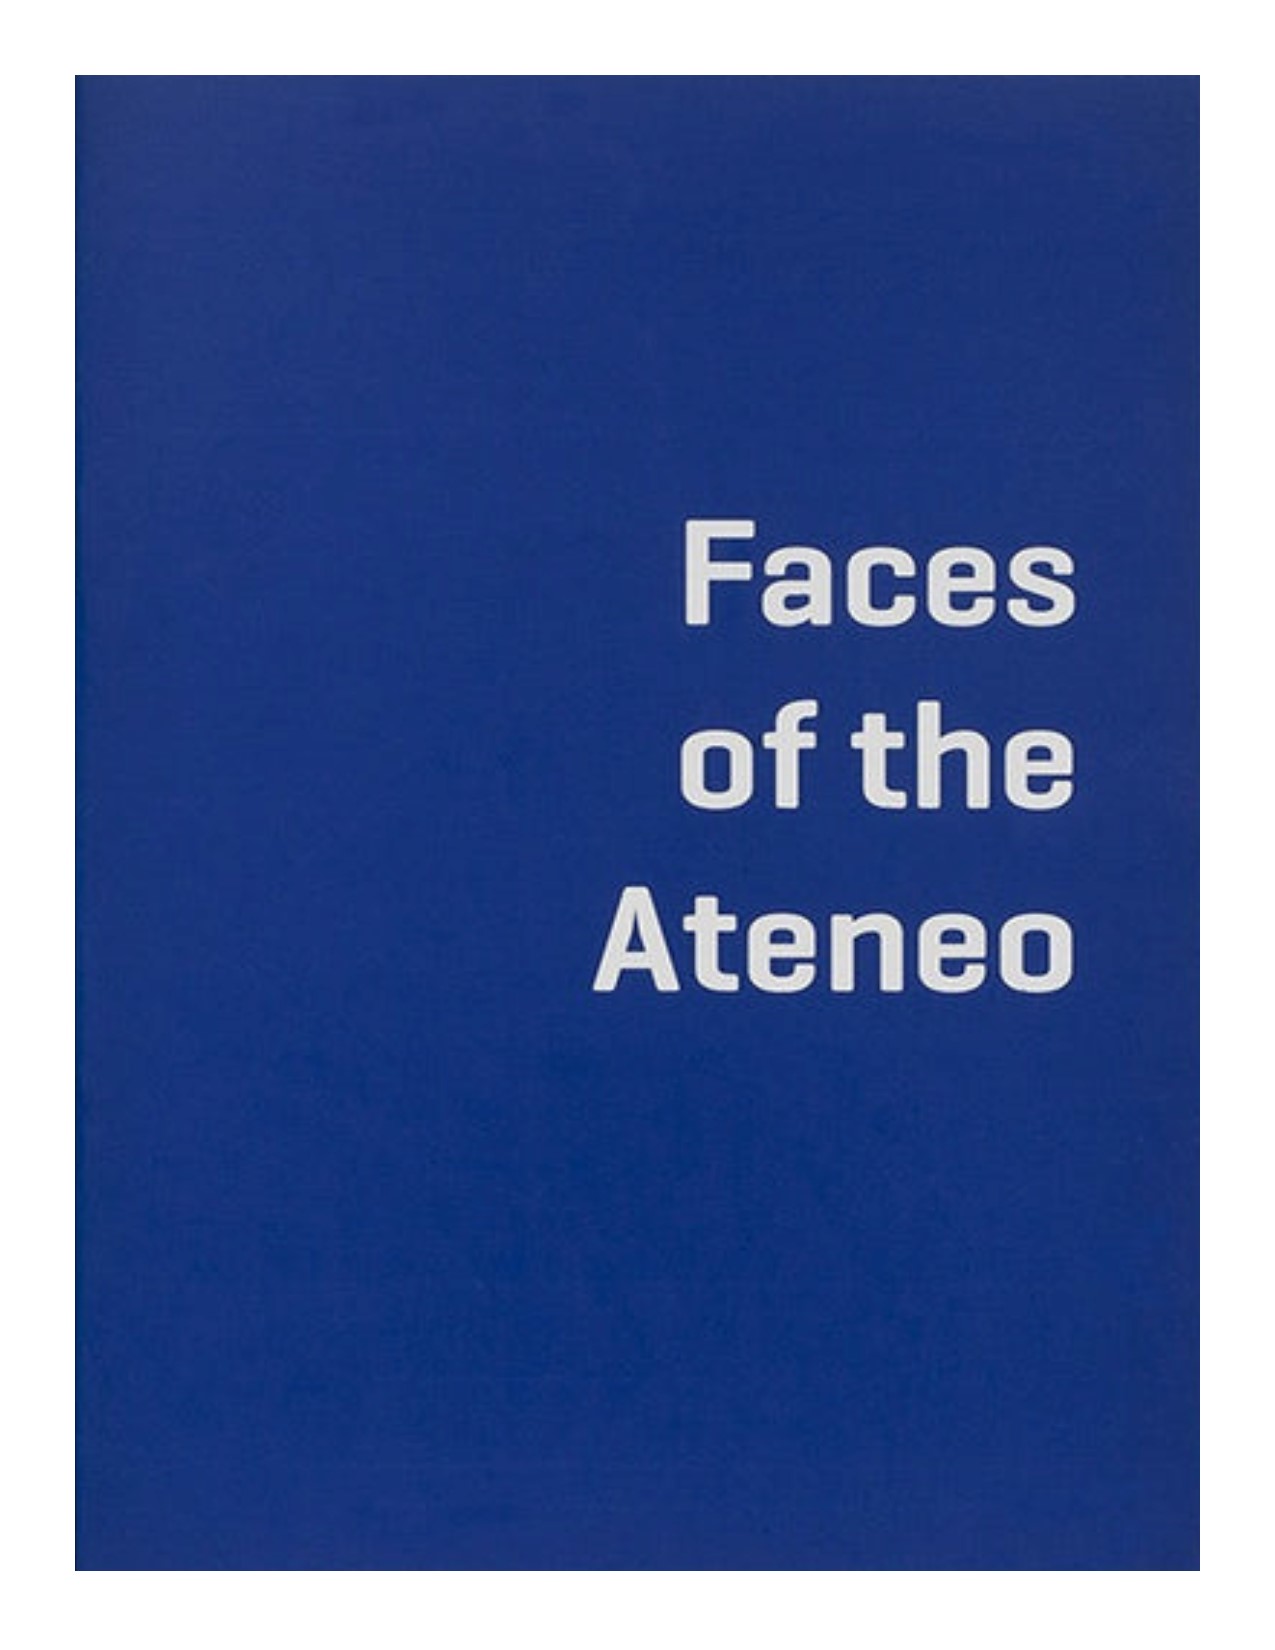 Faces of the Ateneo